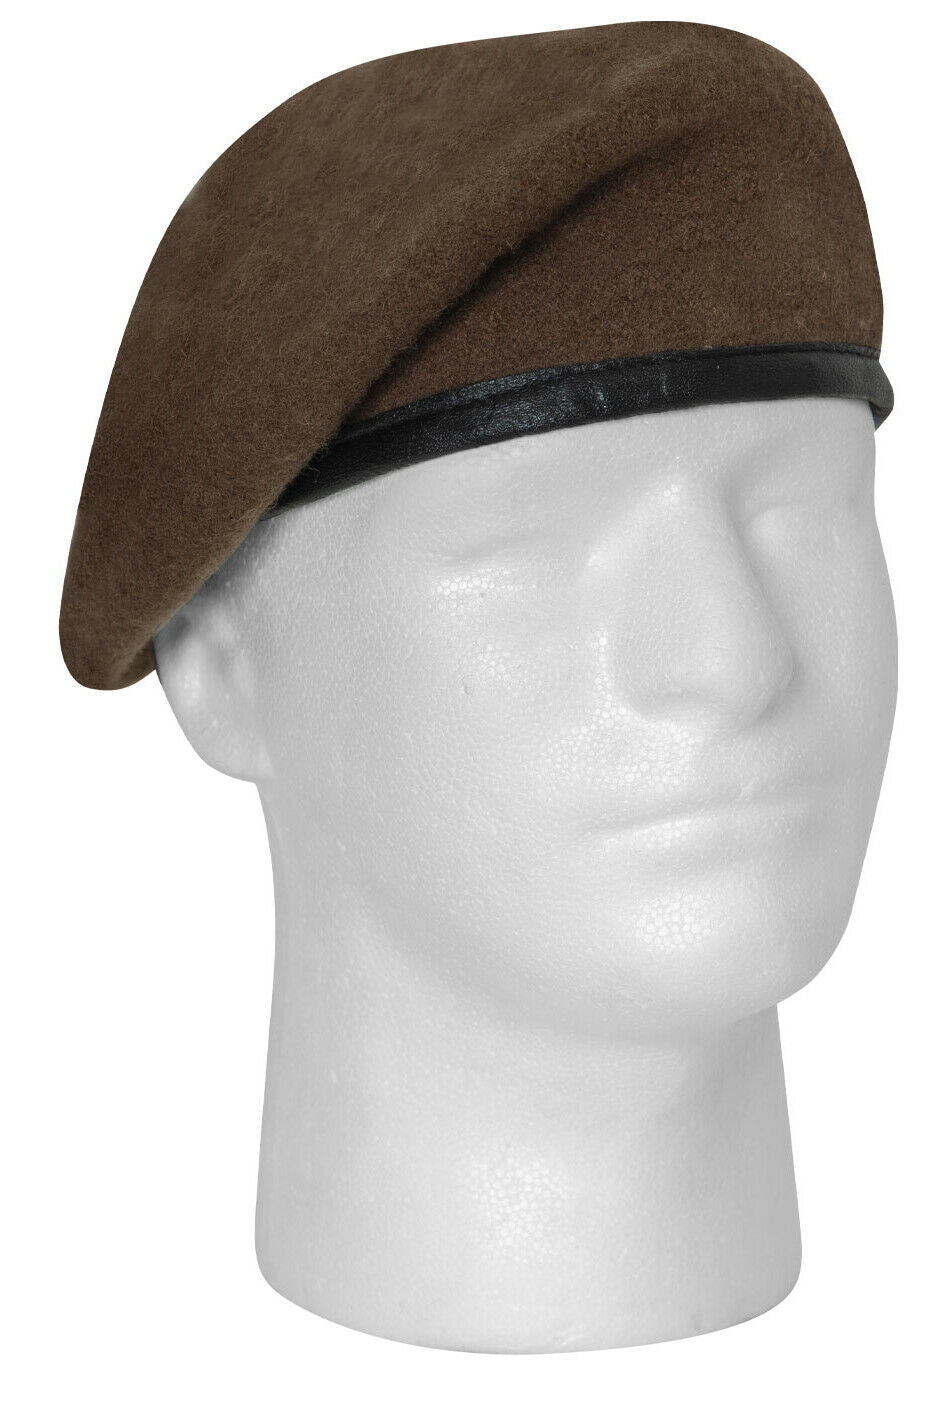 Rothco G.I. Type Inspection Ready Beret - Brown